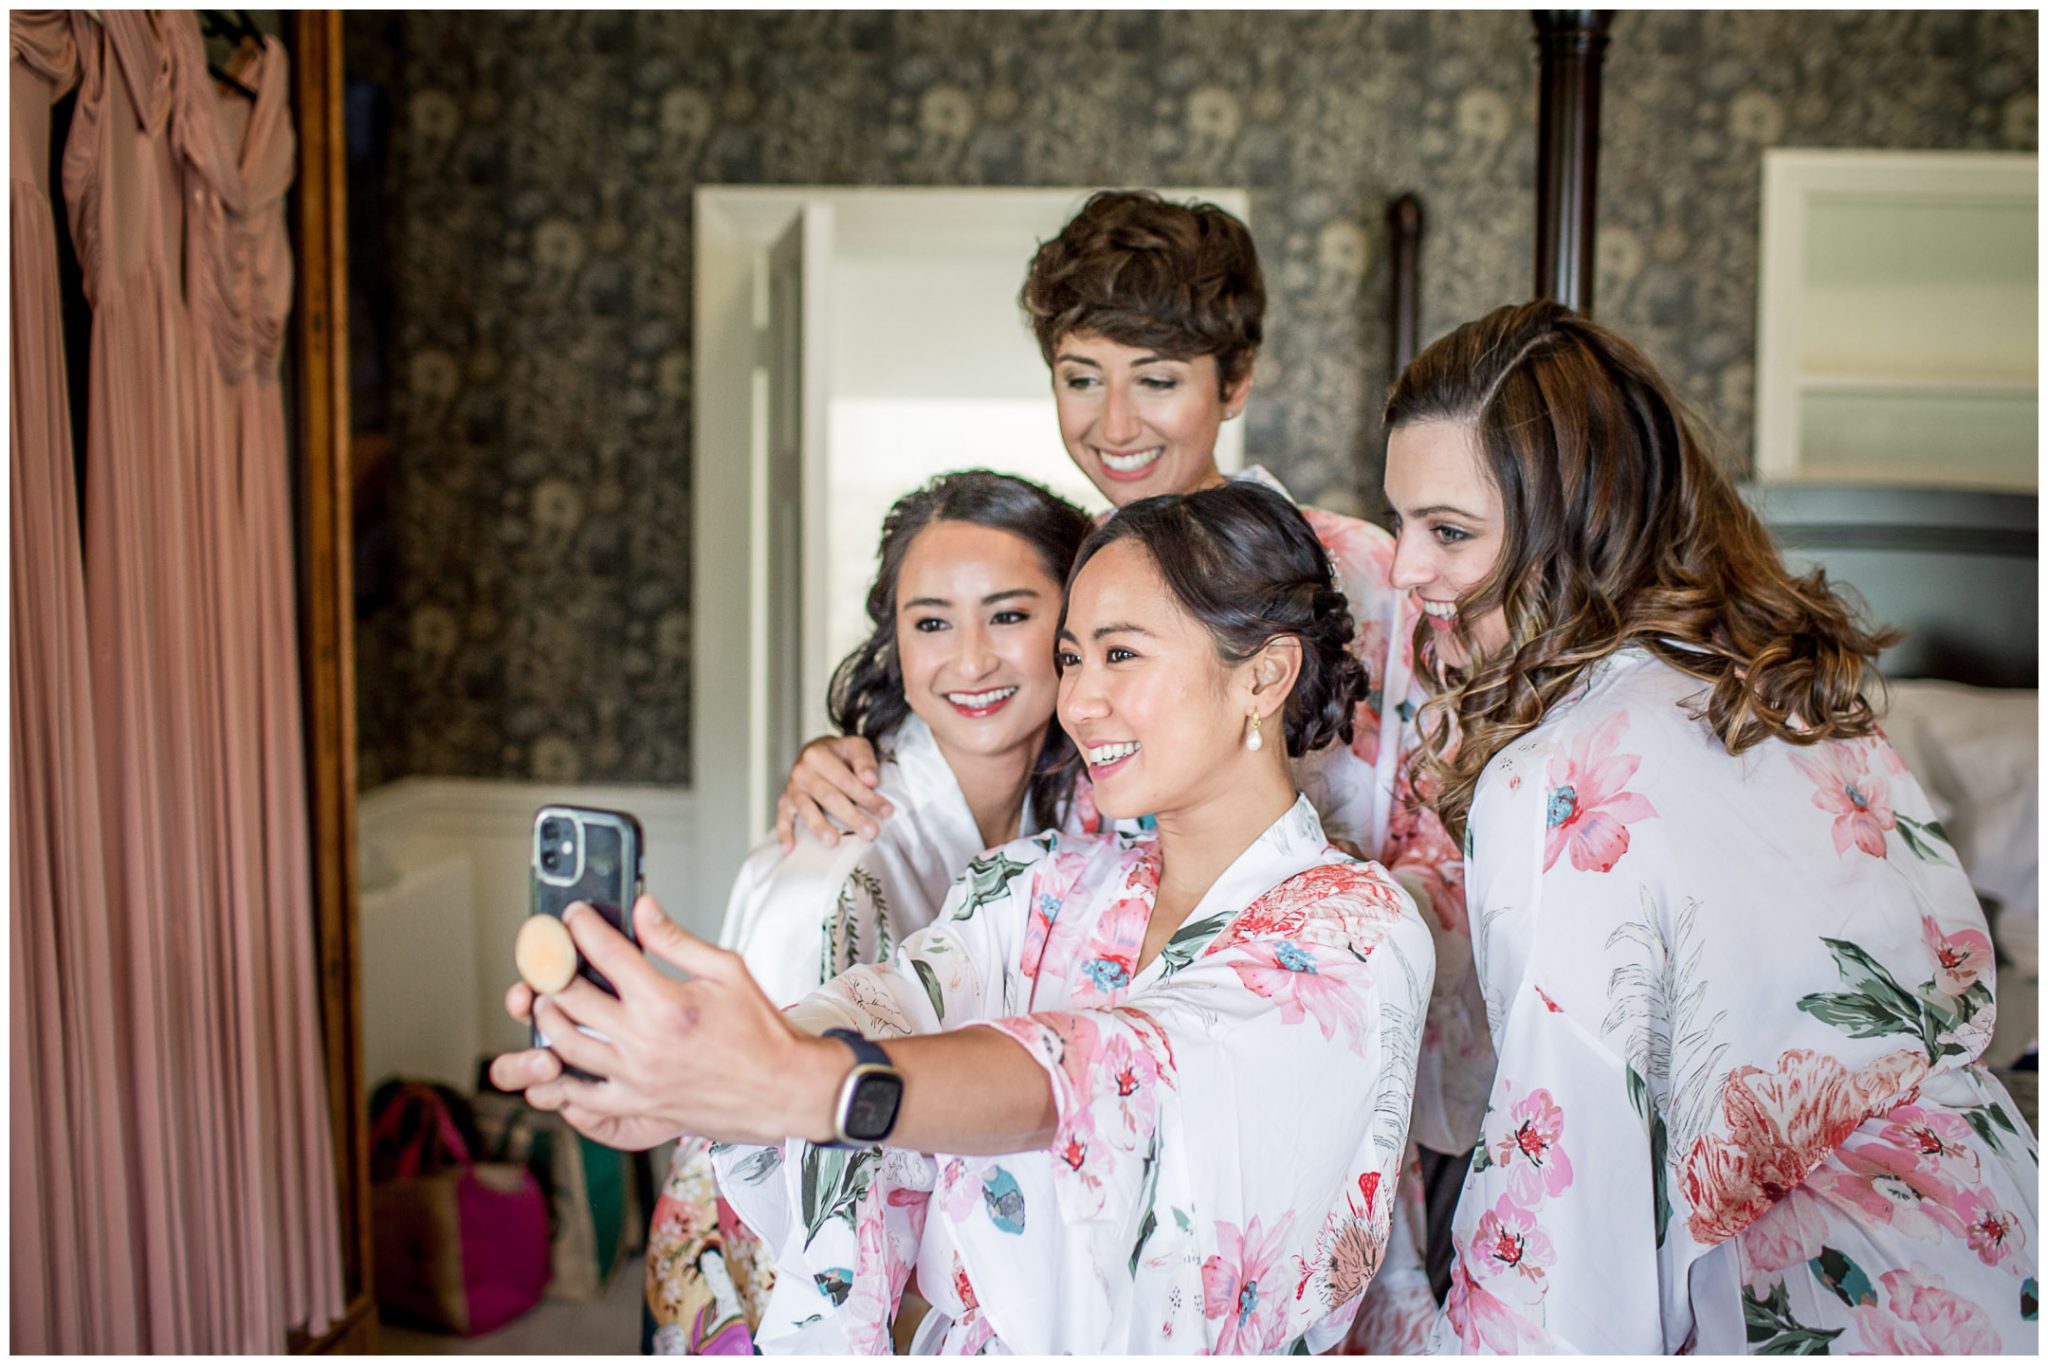 Bride and bridesmaids pose for a selfie